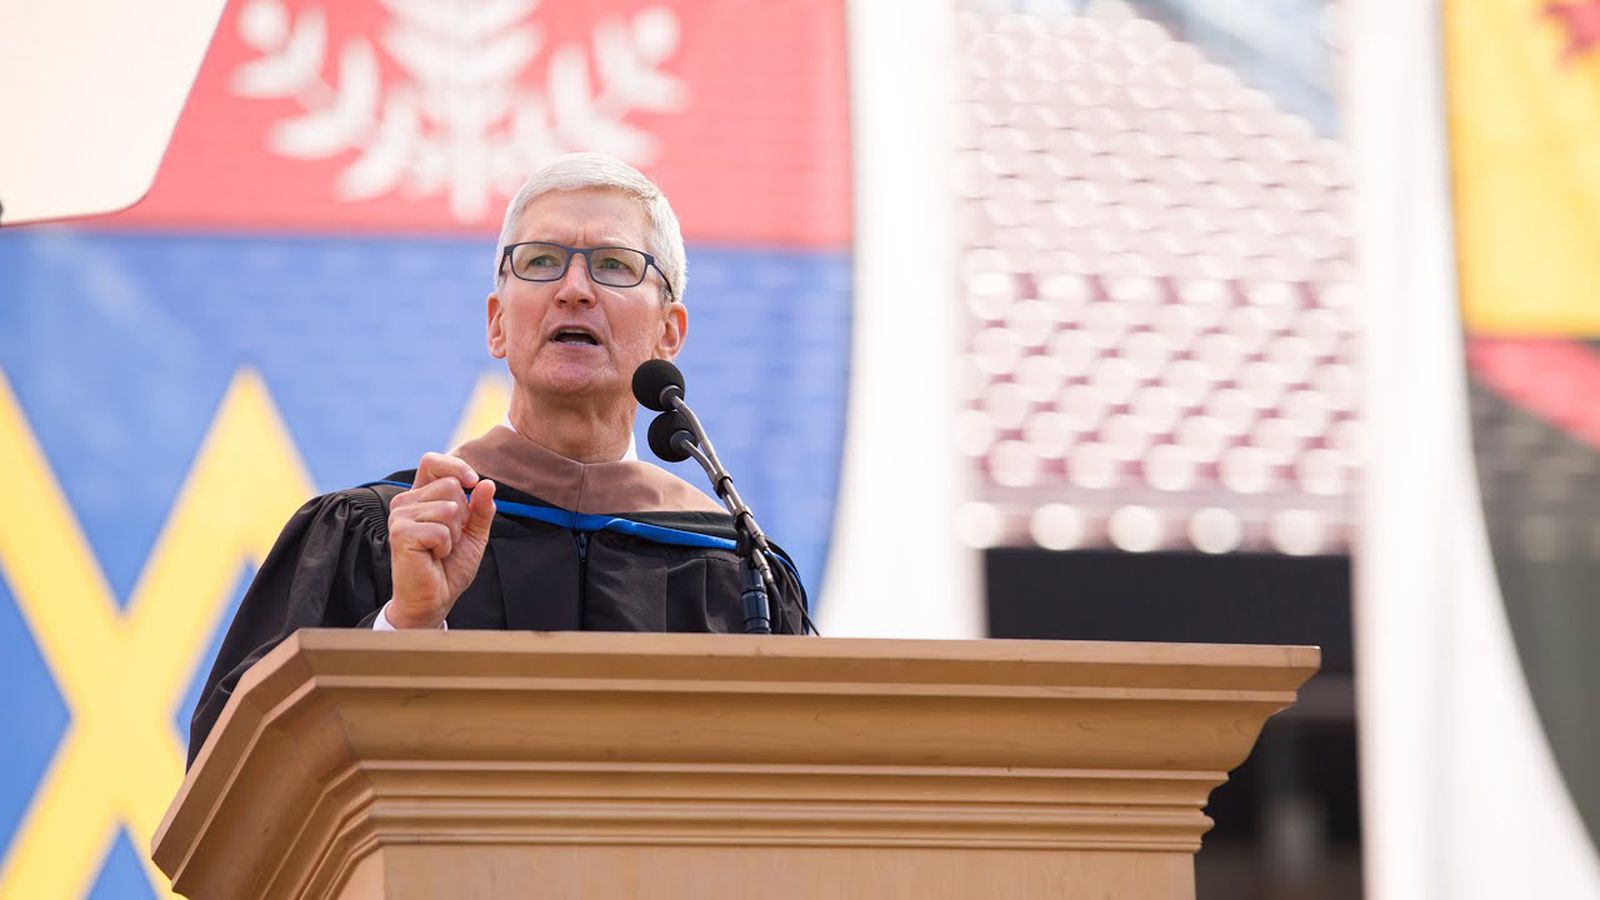 Apple CEO Tim Cook to Deliver Commencement Address at Gallaudet University